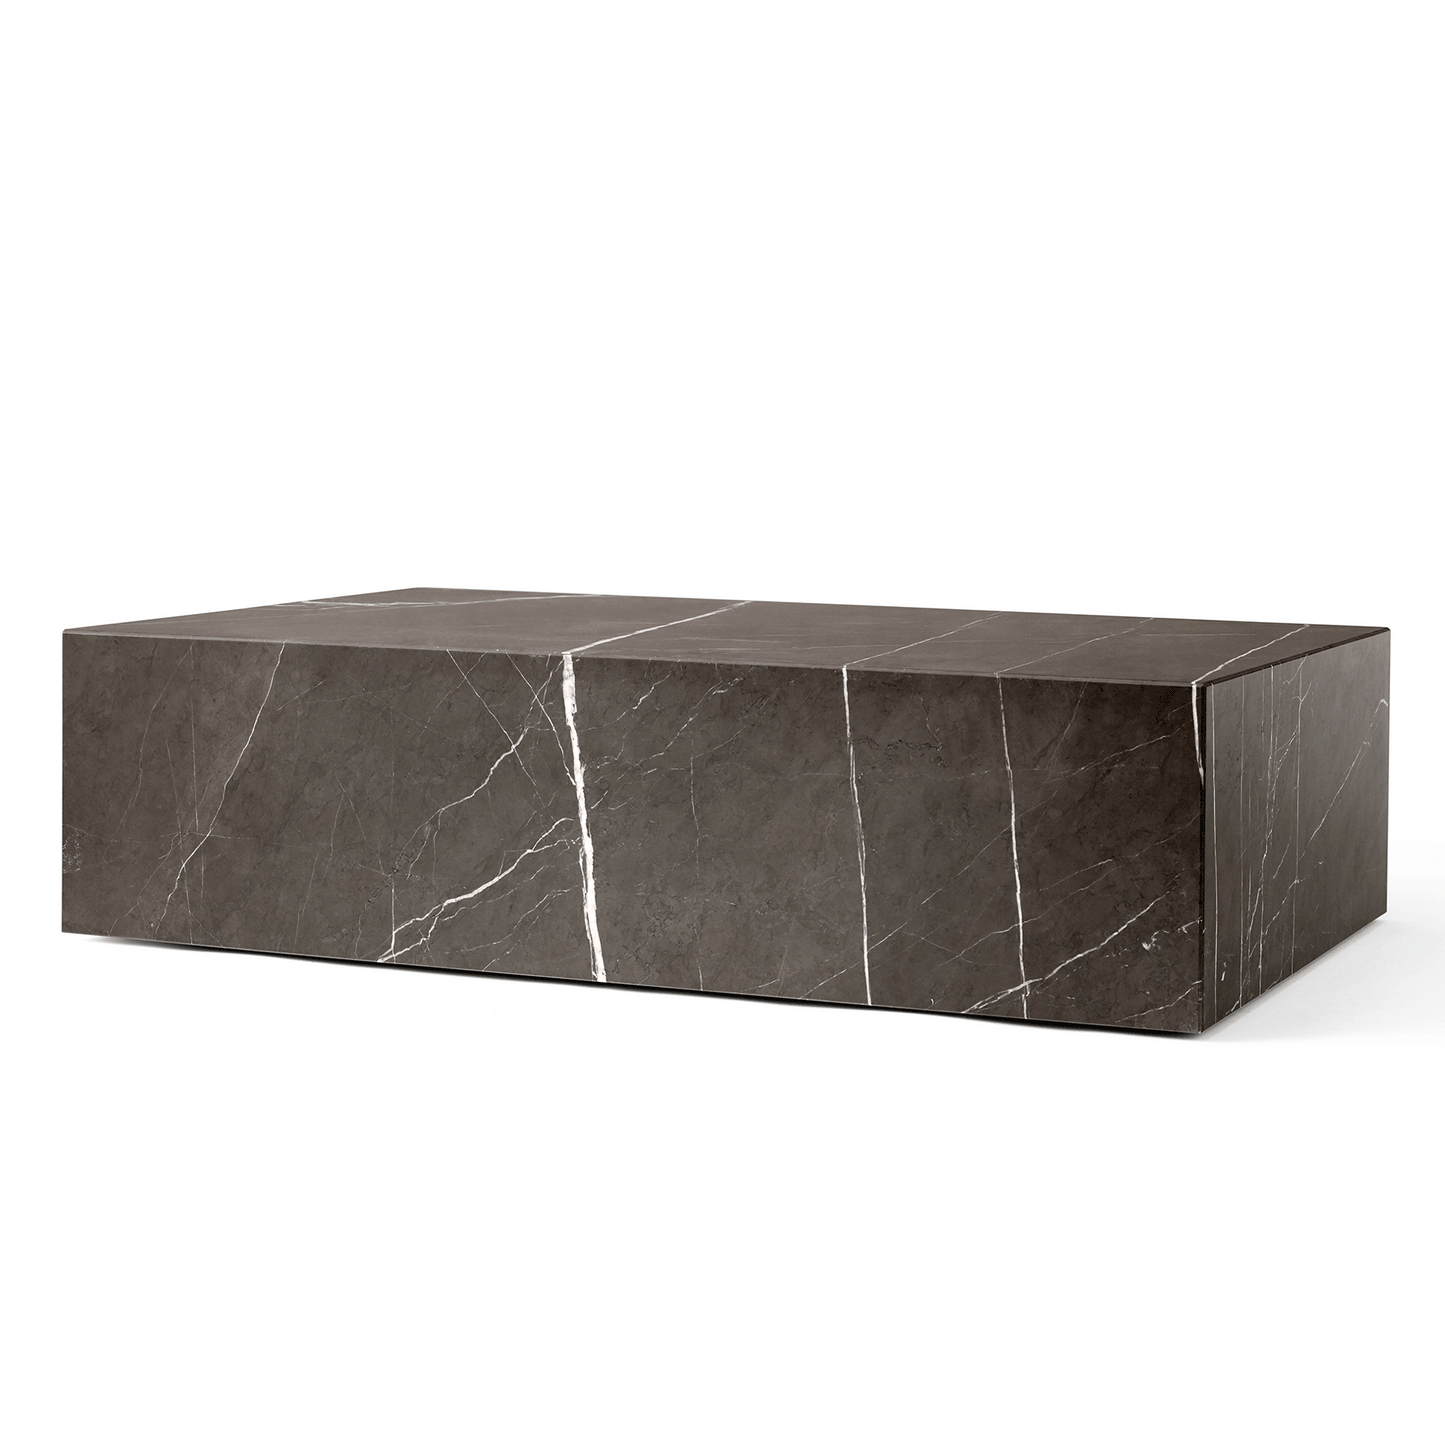 Plinth Coffee Table Low by Audo #Gray Kendzo Marble